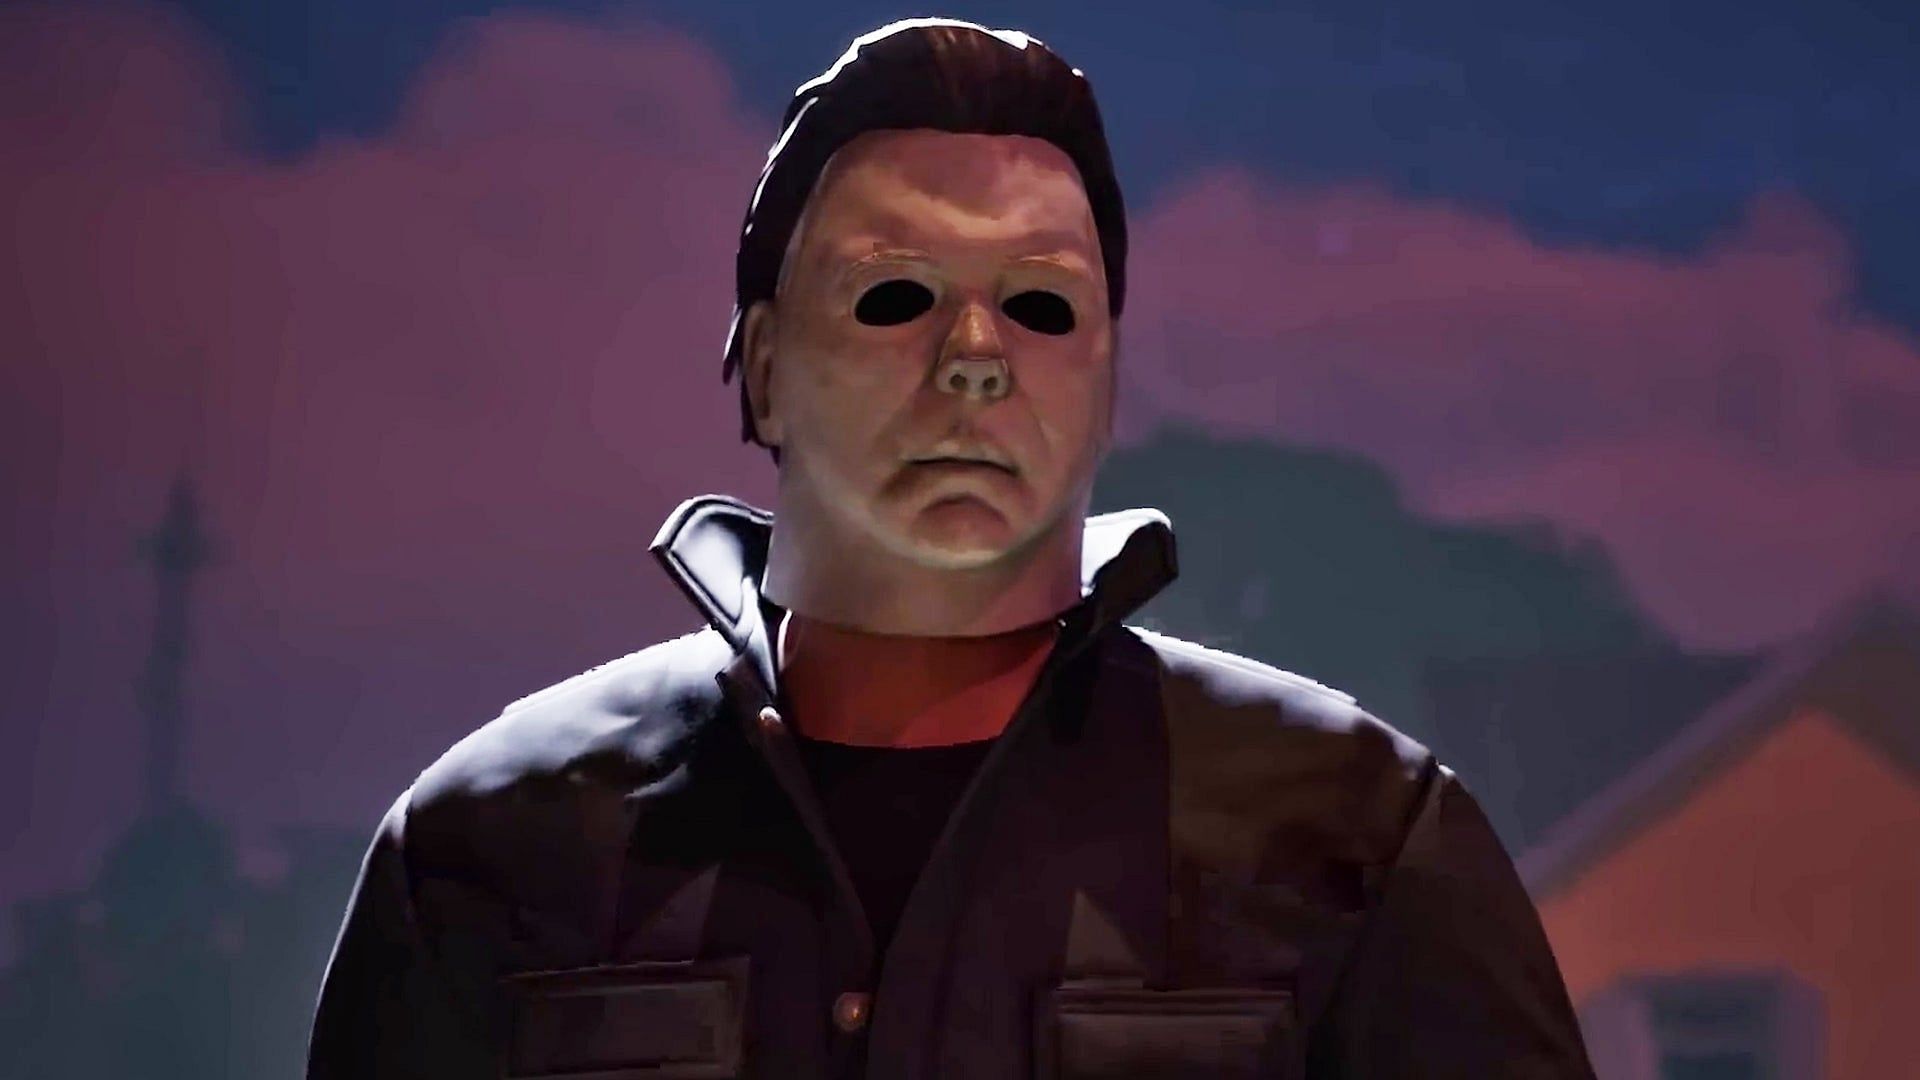 The Fortnitemares Michael Myers skin